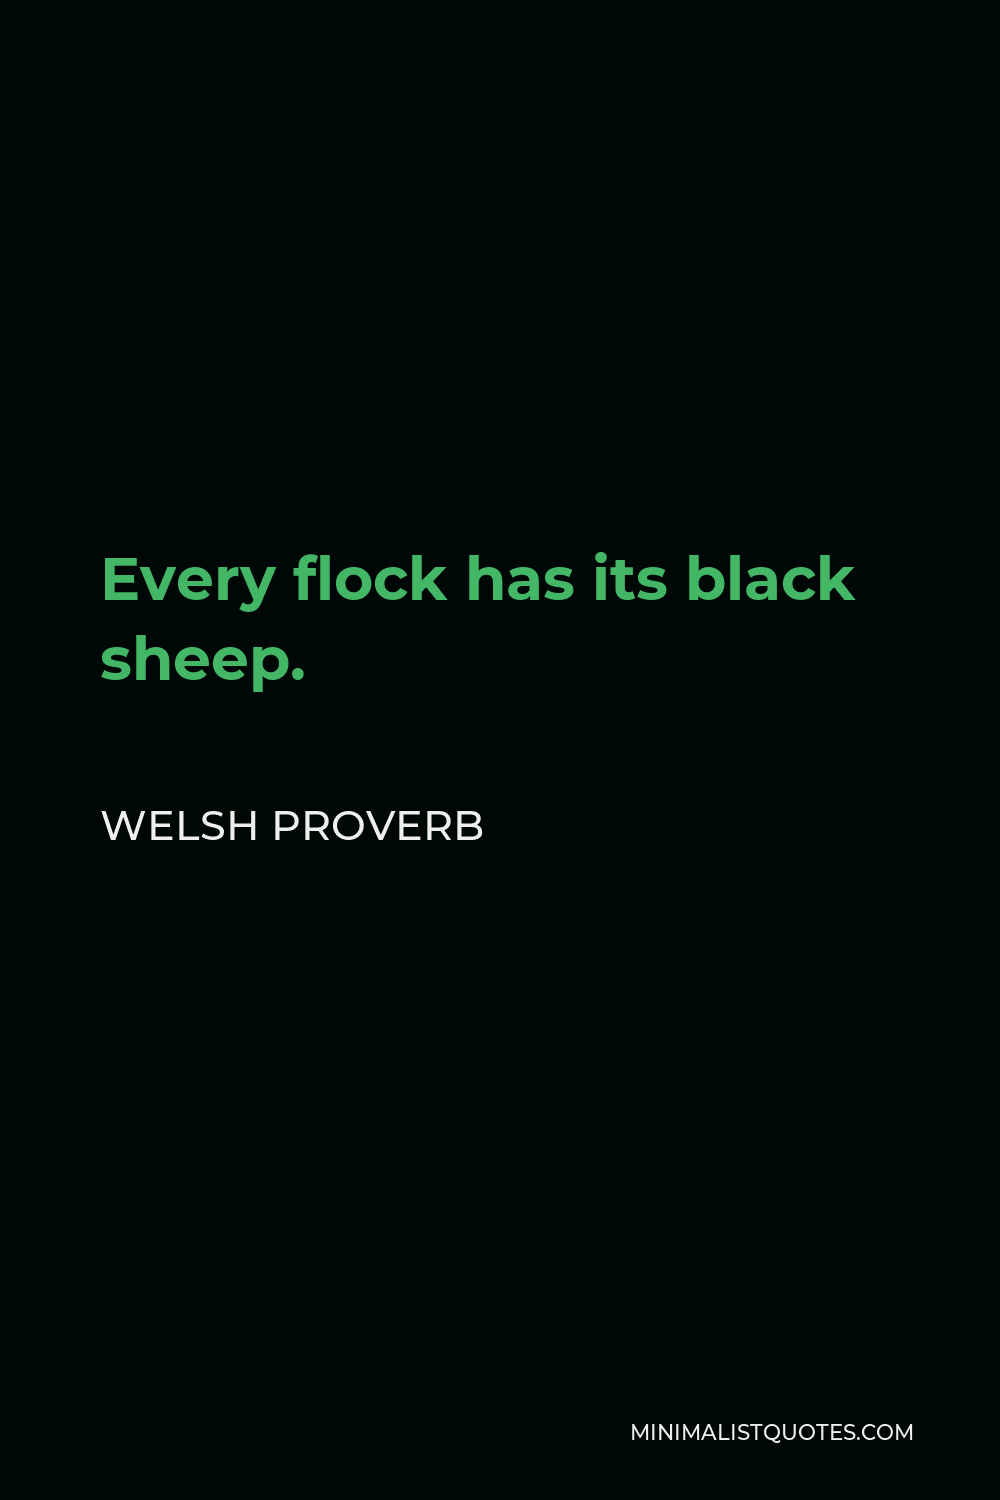 Welsh Proverb Quote - Every flock has its black sheep.